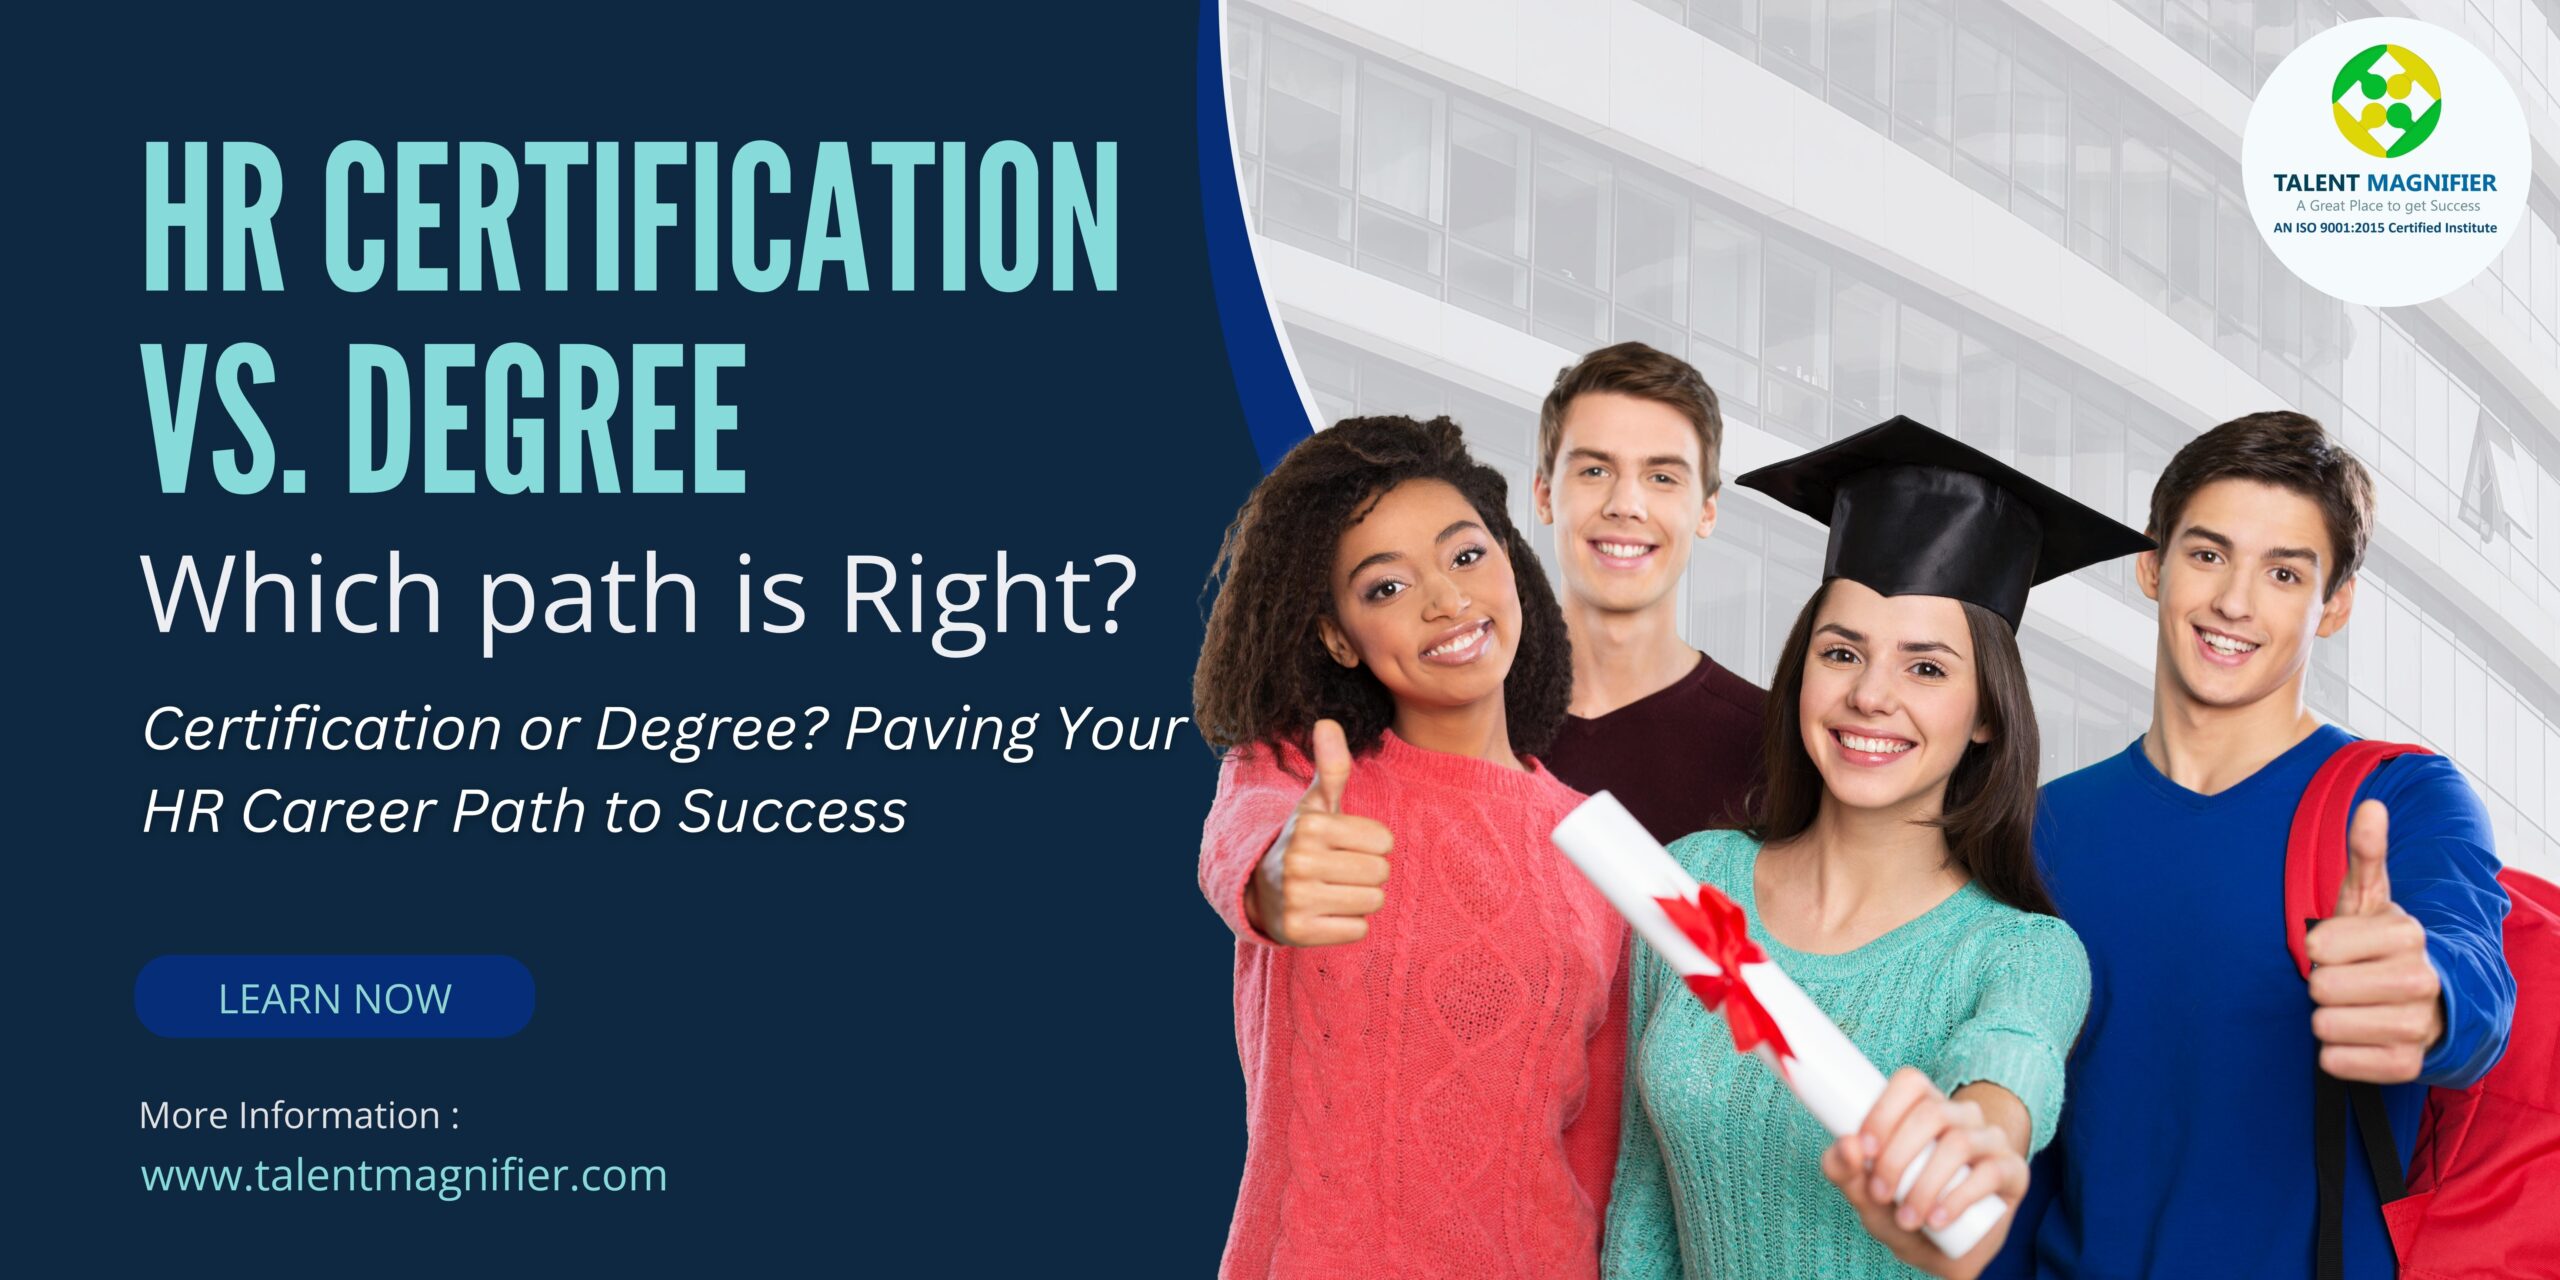 HR Certification Course vs. Degree - Which Path Is Right for You